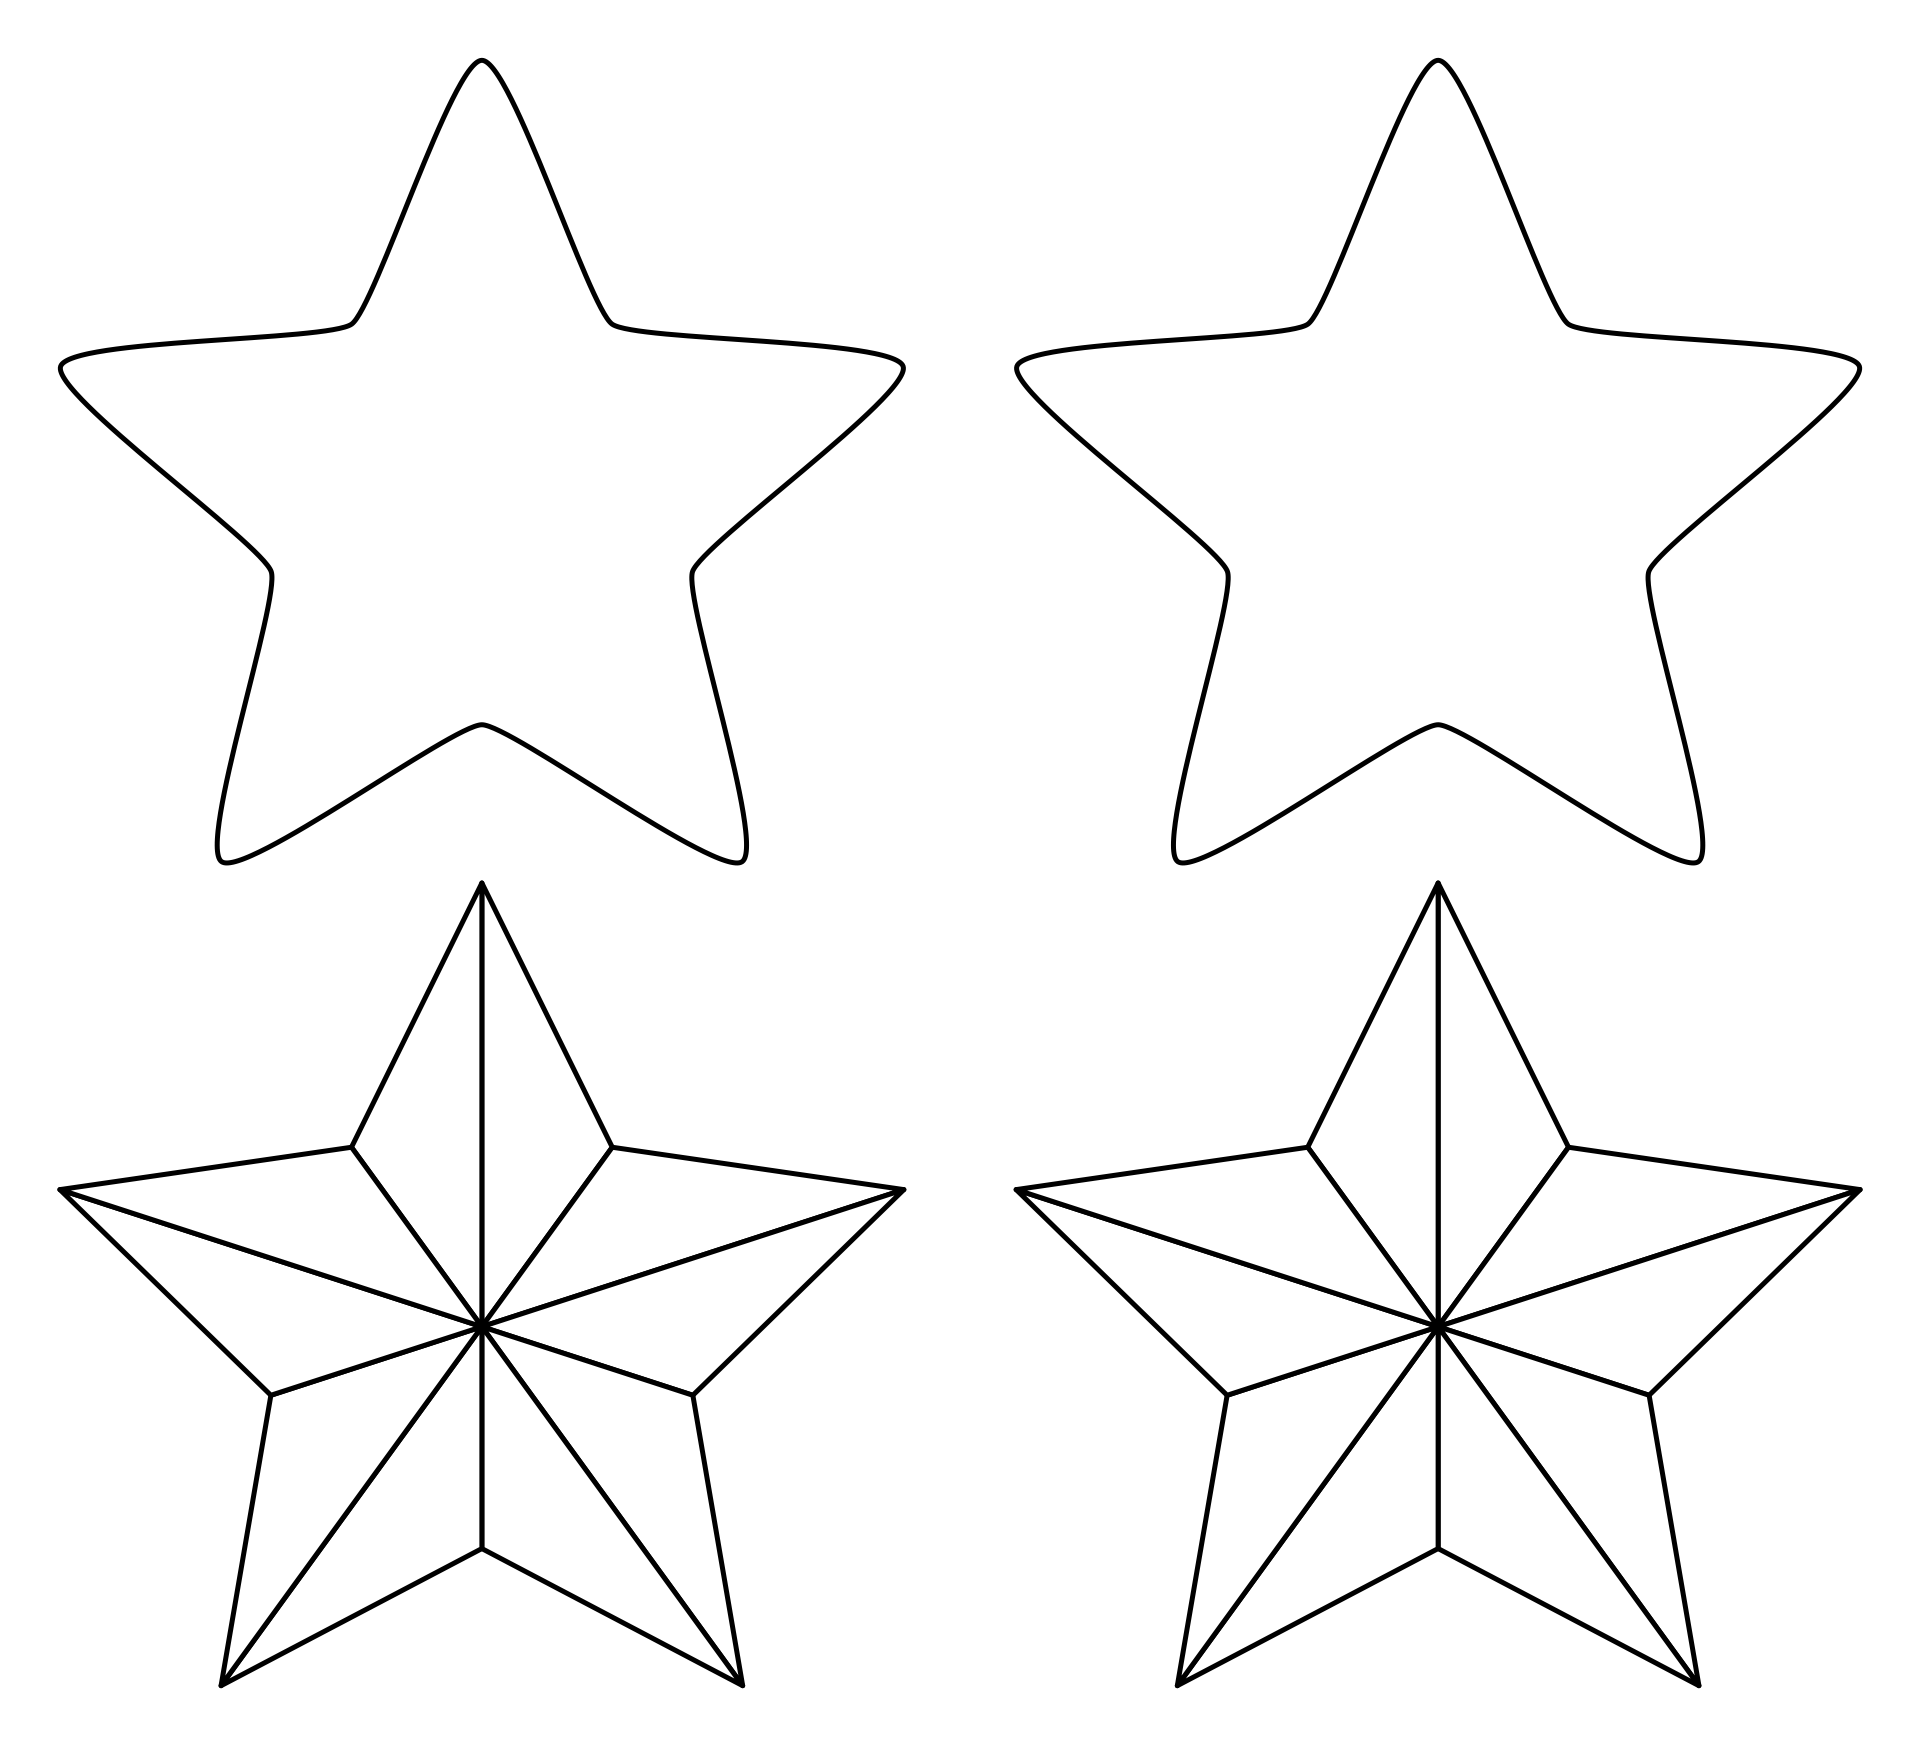 5-best-images-of-large-star-stencil-printable-large-star-template-5-point-star-template-and